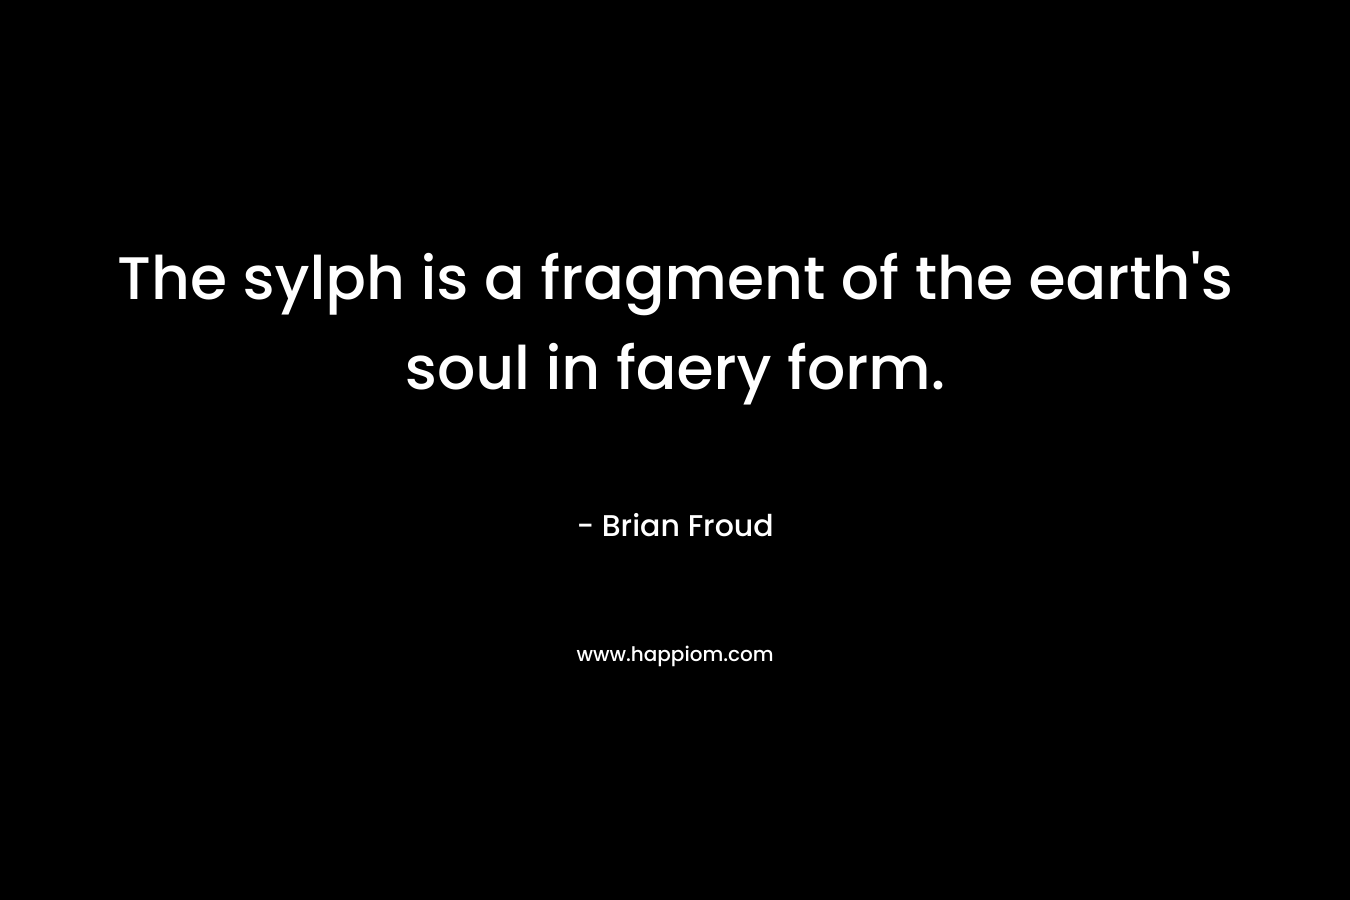 The sylph is a fragment of the earth’s soul in faery form. – Brian Froud